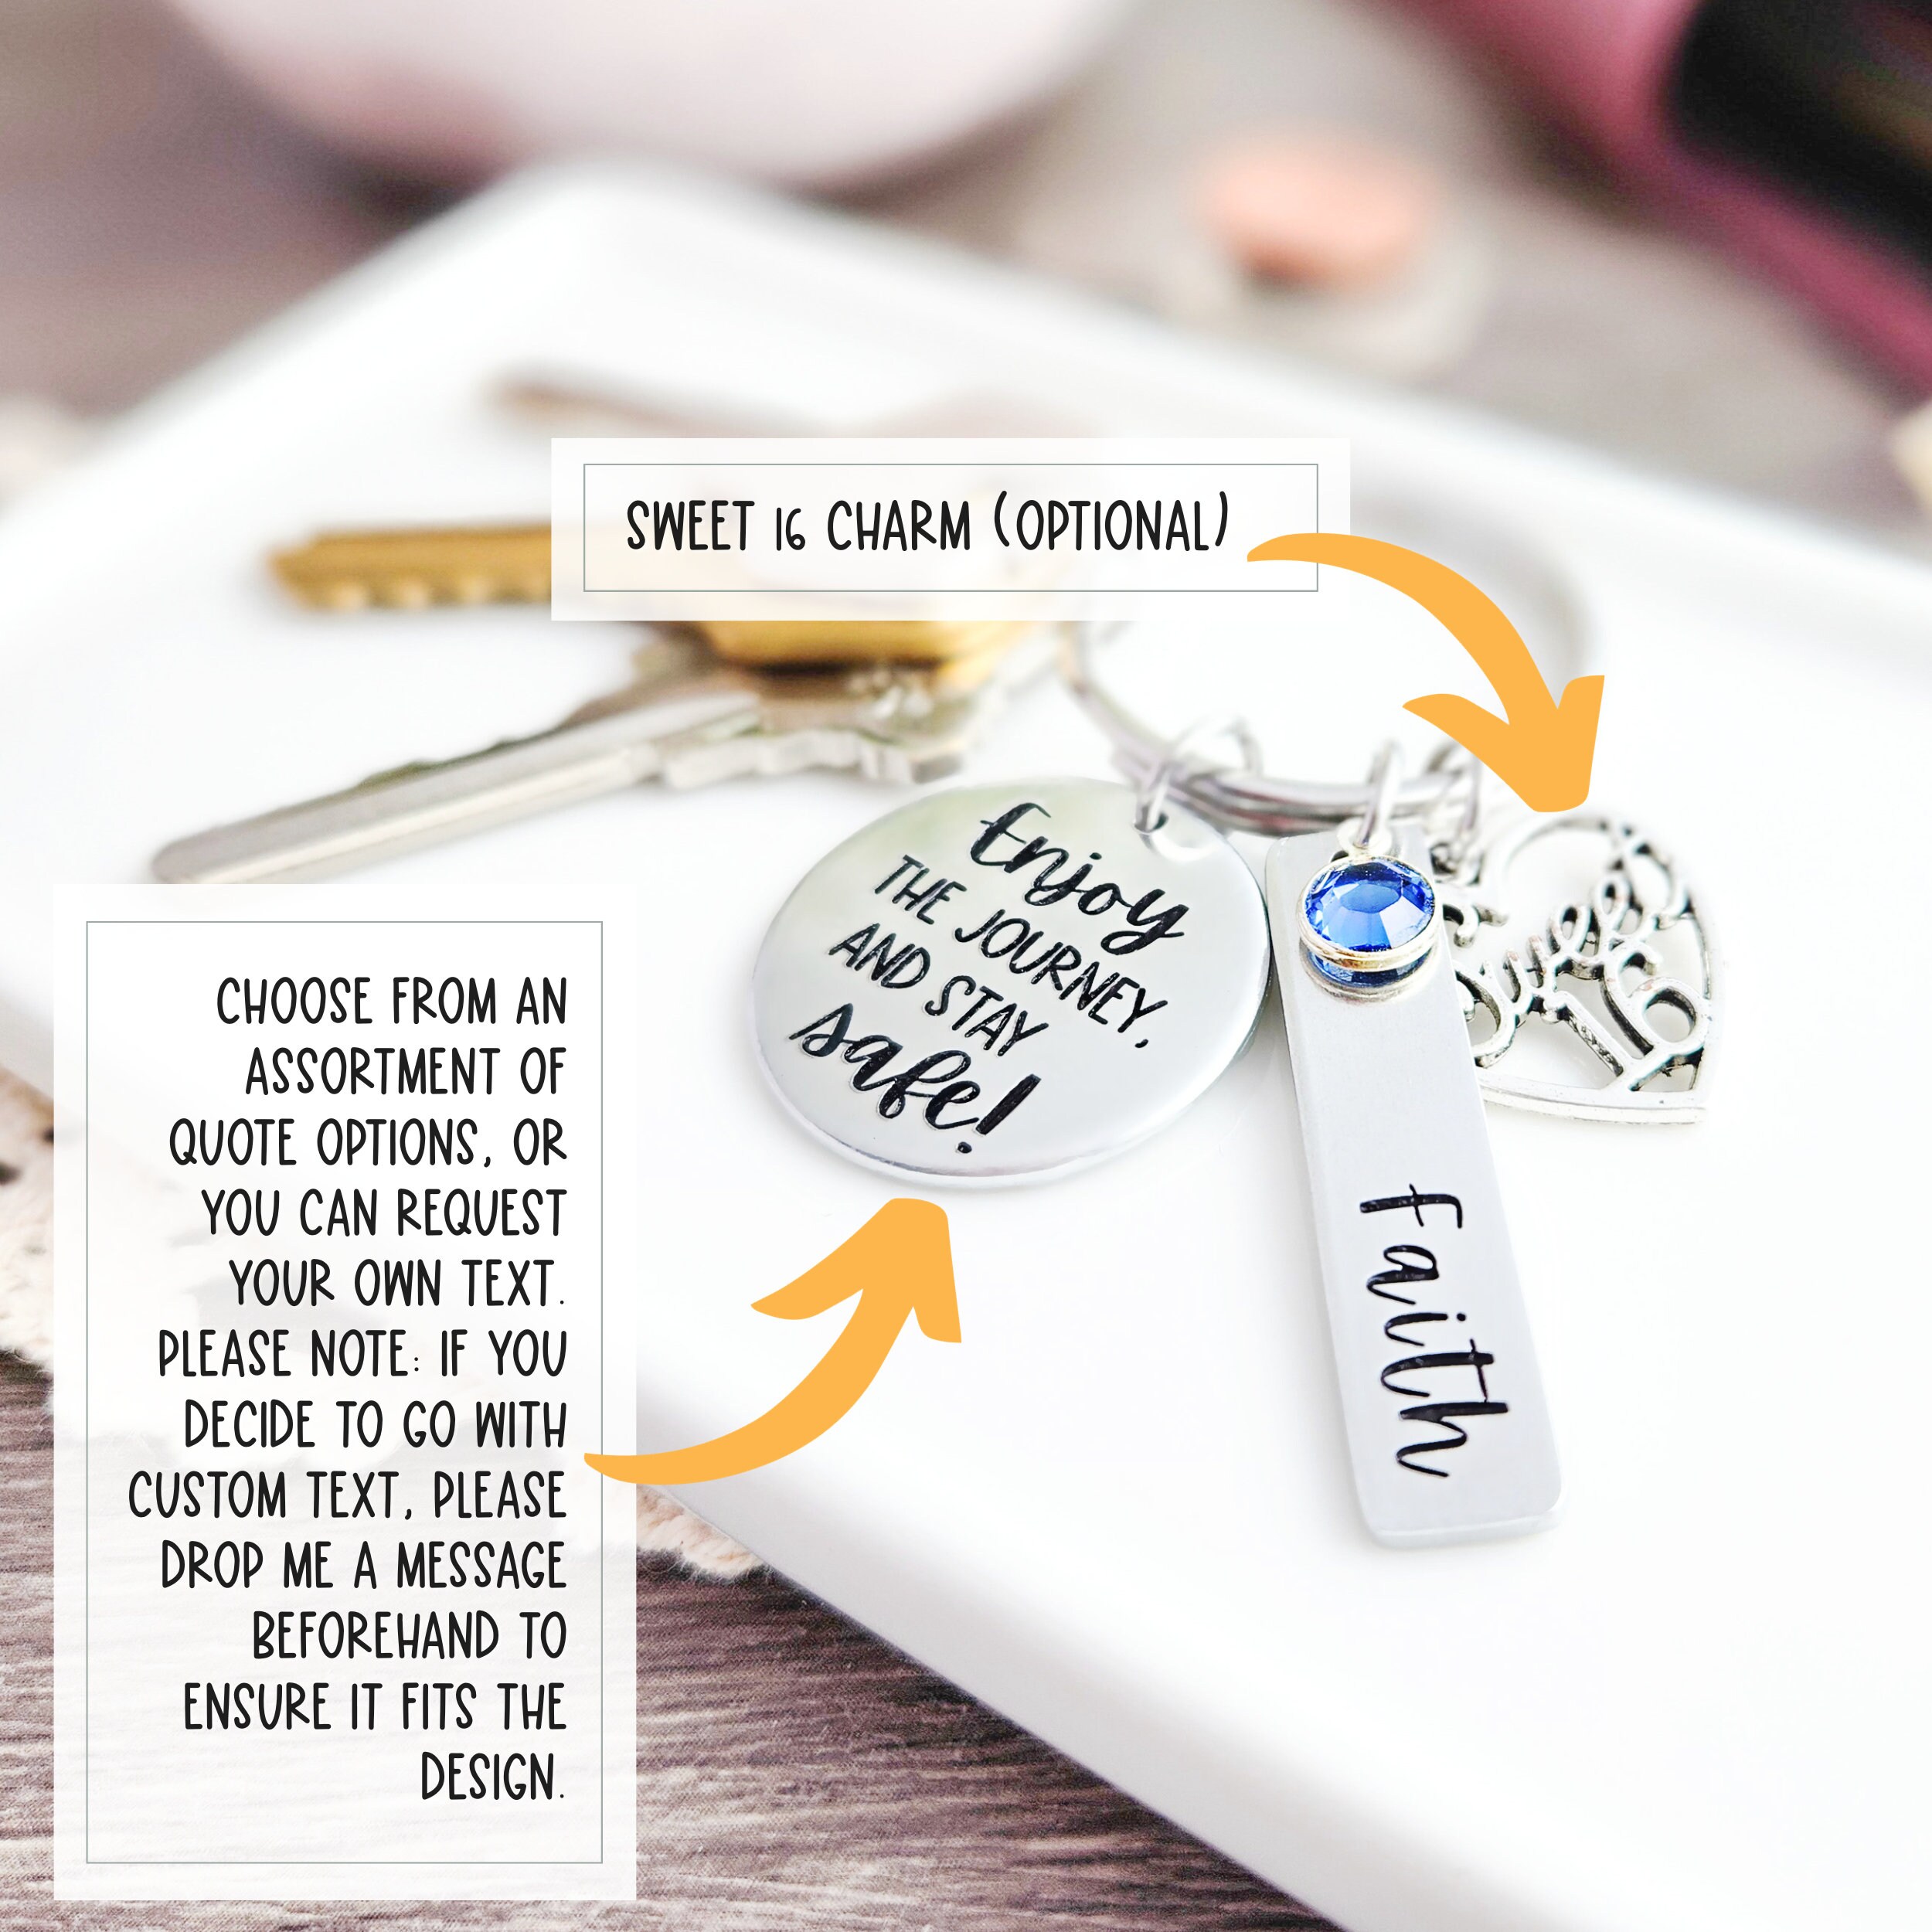 Drive Safe Keychain - Personalized Sweet 16 Keychain - Life is a Journey -  Sweet 16 - 3 design options - Sweet 16 Birthday Gift for Teenager